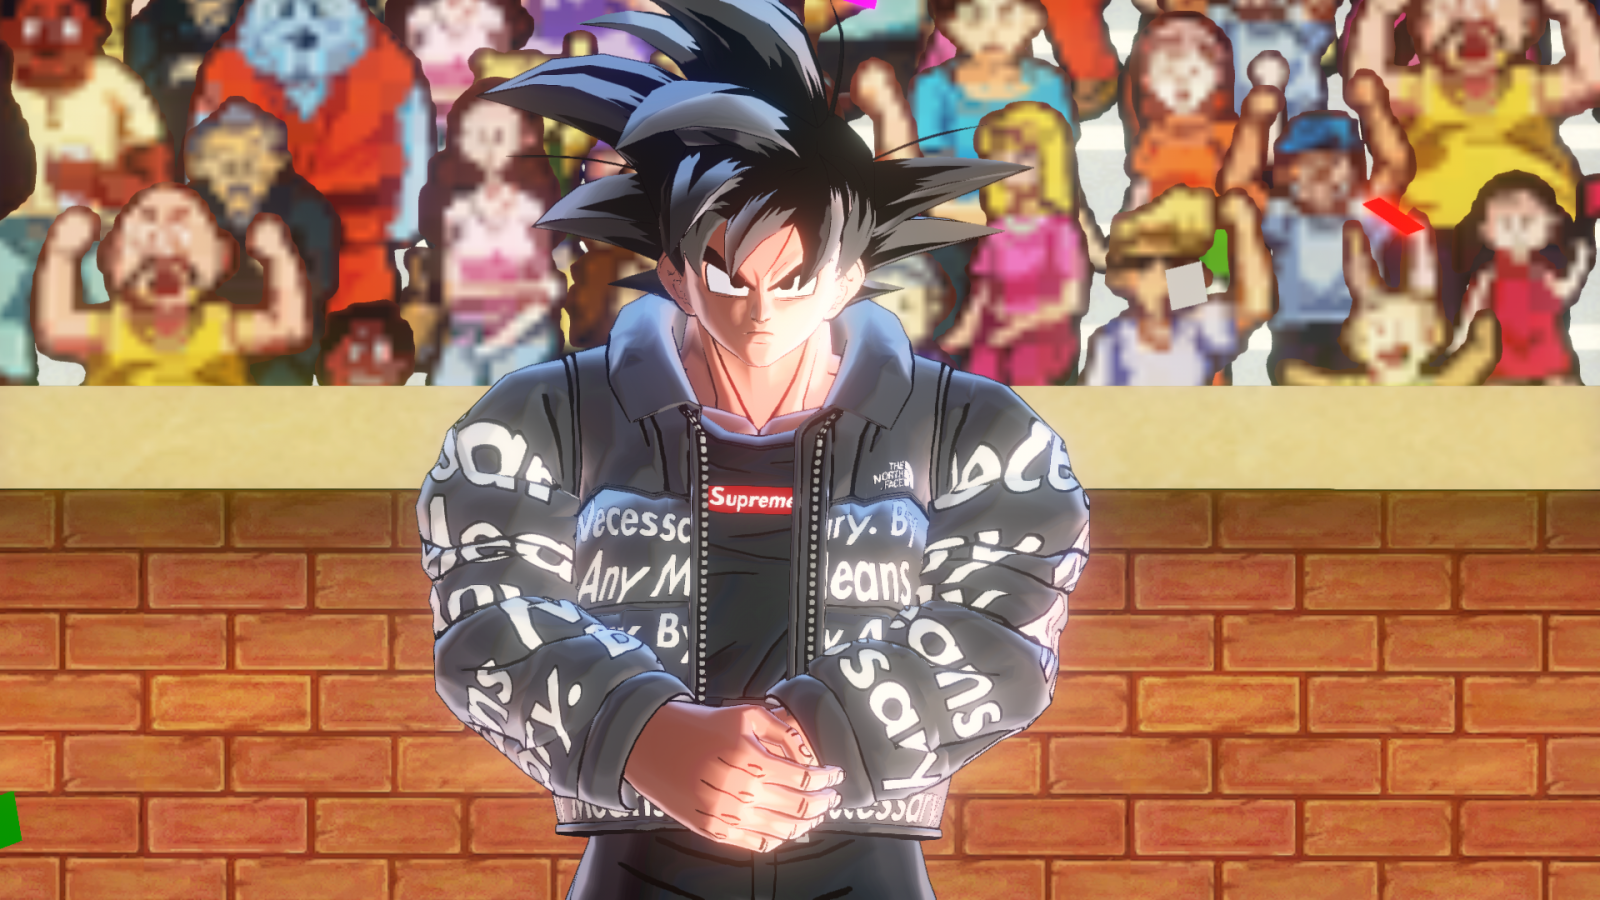 Drip Goku Xenoverse Mods Son goku is a courageous fighter who fears no evil. video game mods